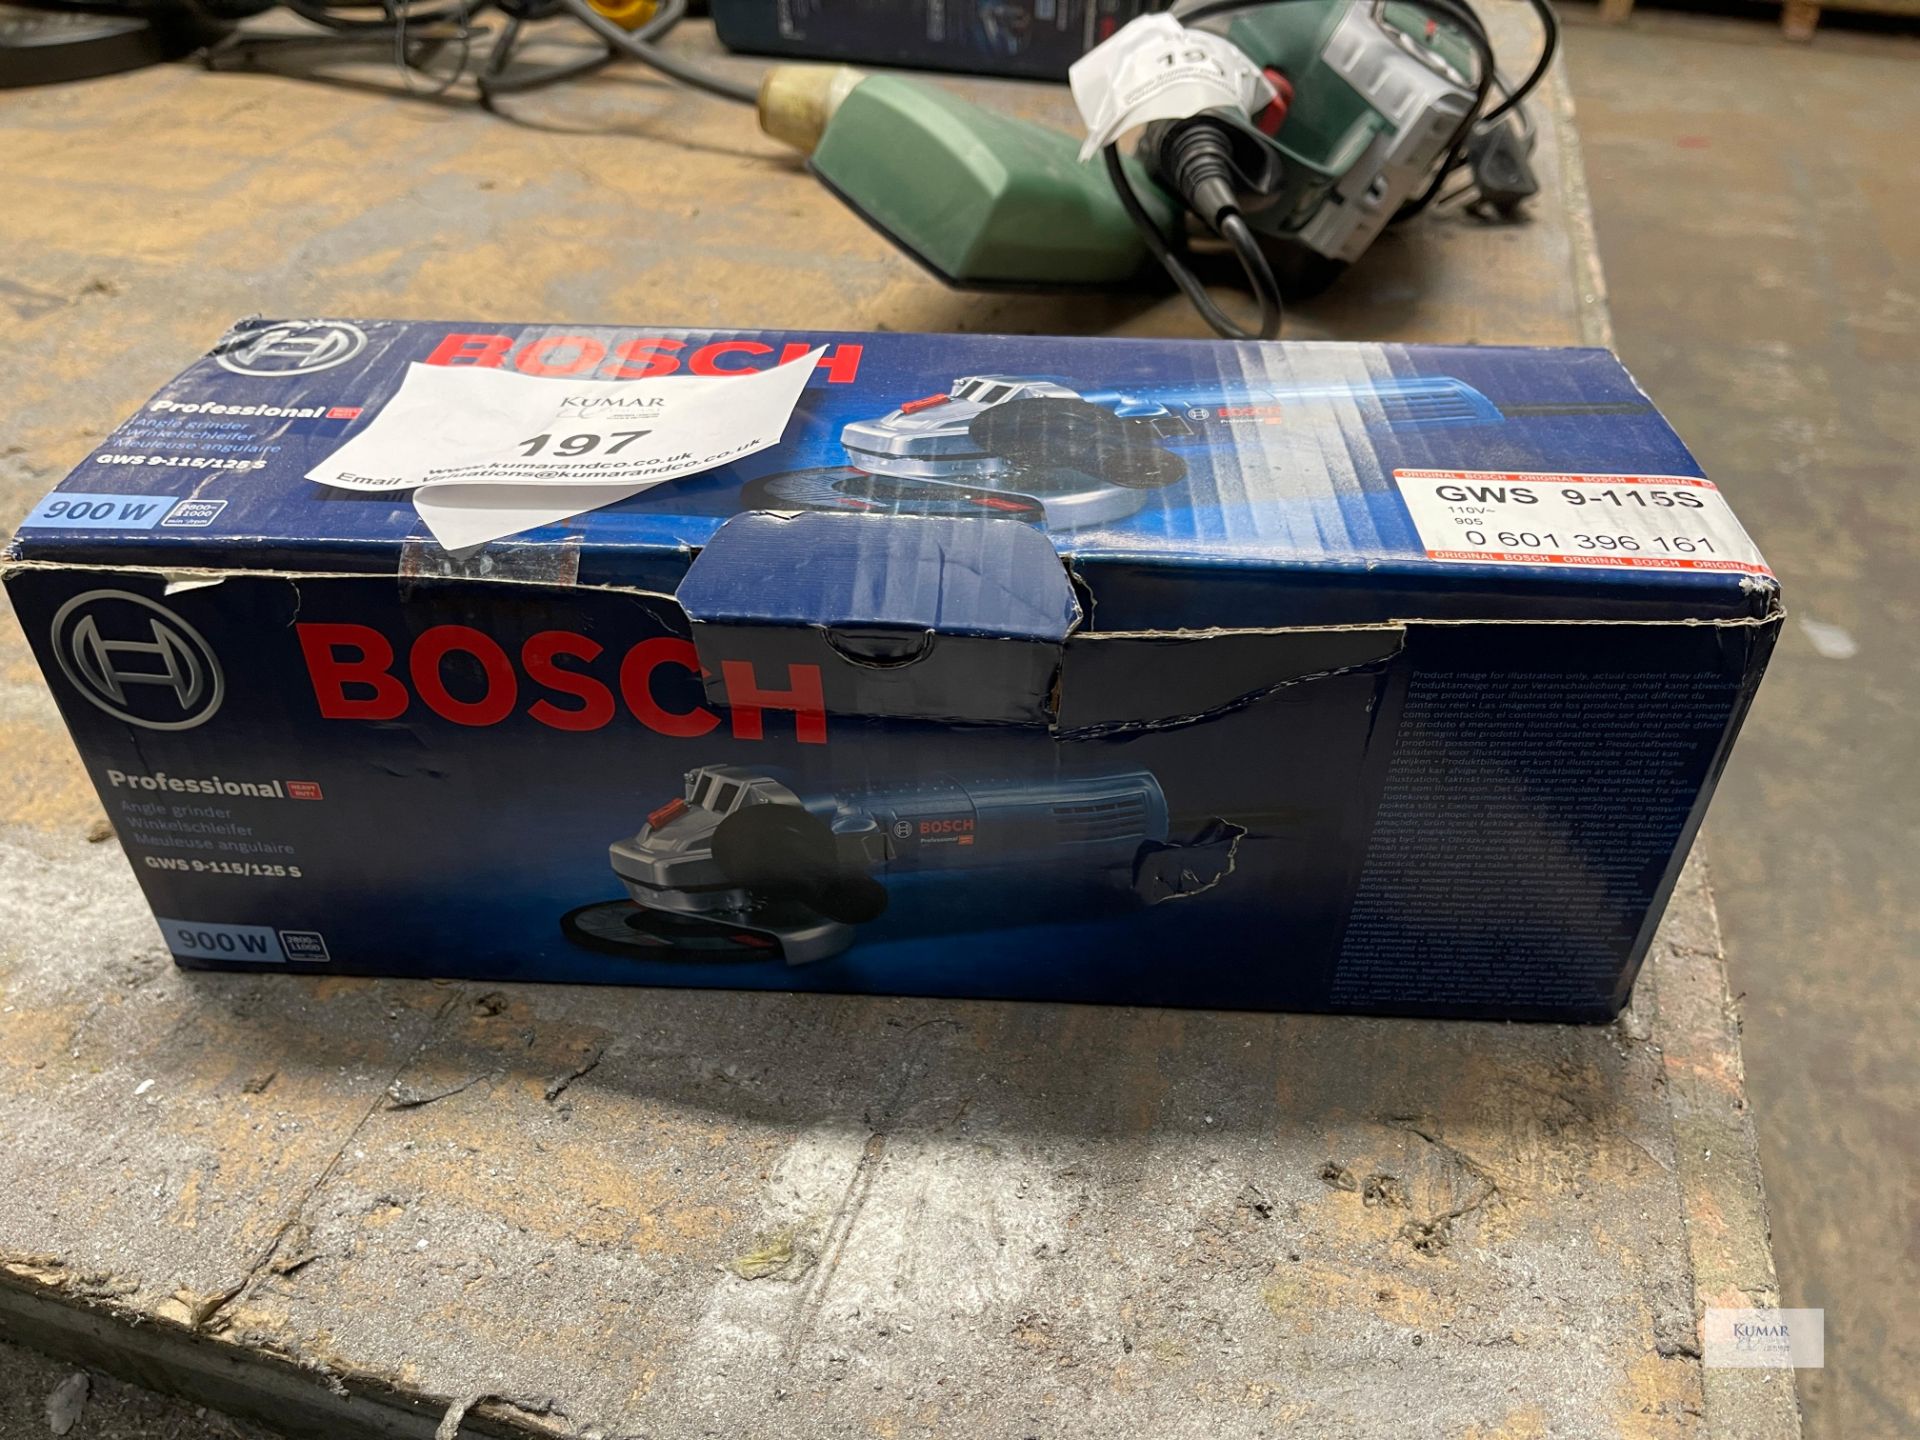 Bosch Professional GWS-115s 110v Corded Angle Grinder - As New in Box - Seal Unopened as shown - Image 2 of 5